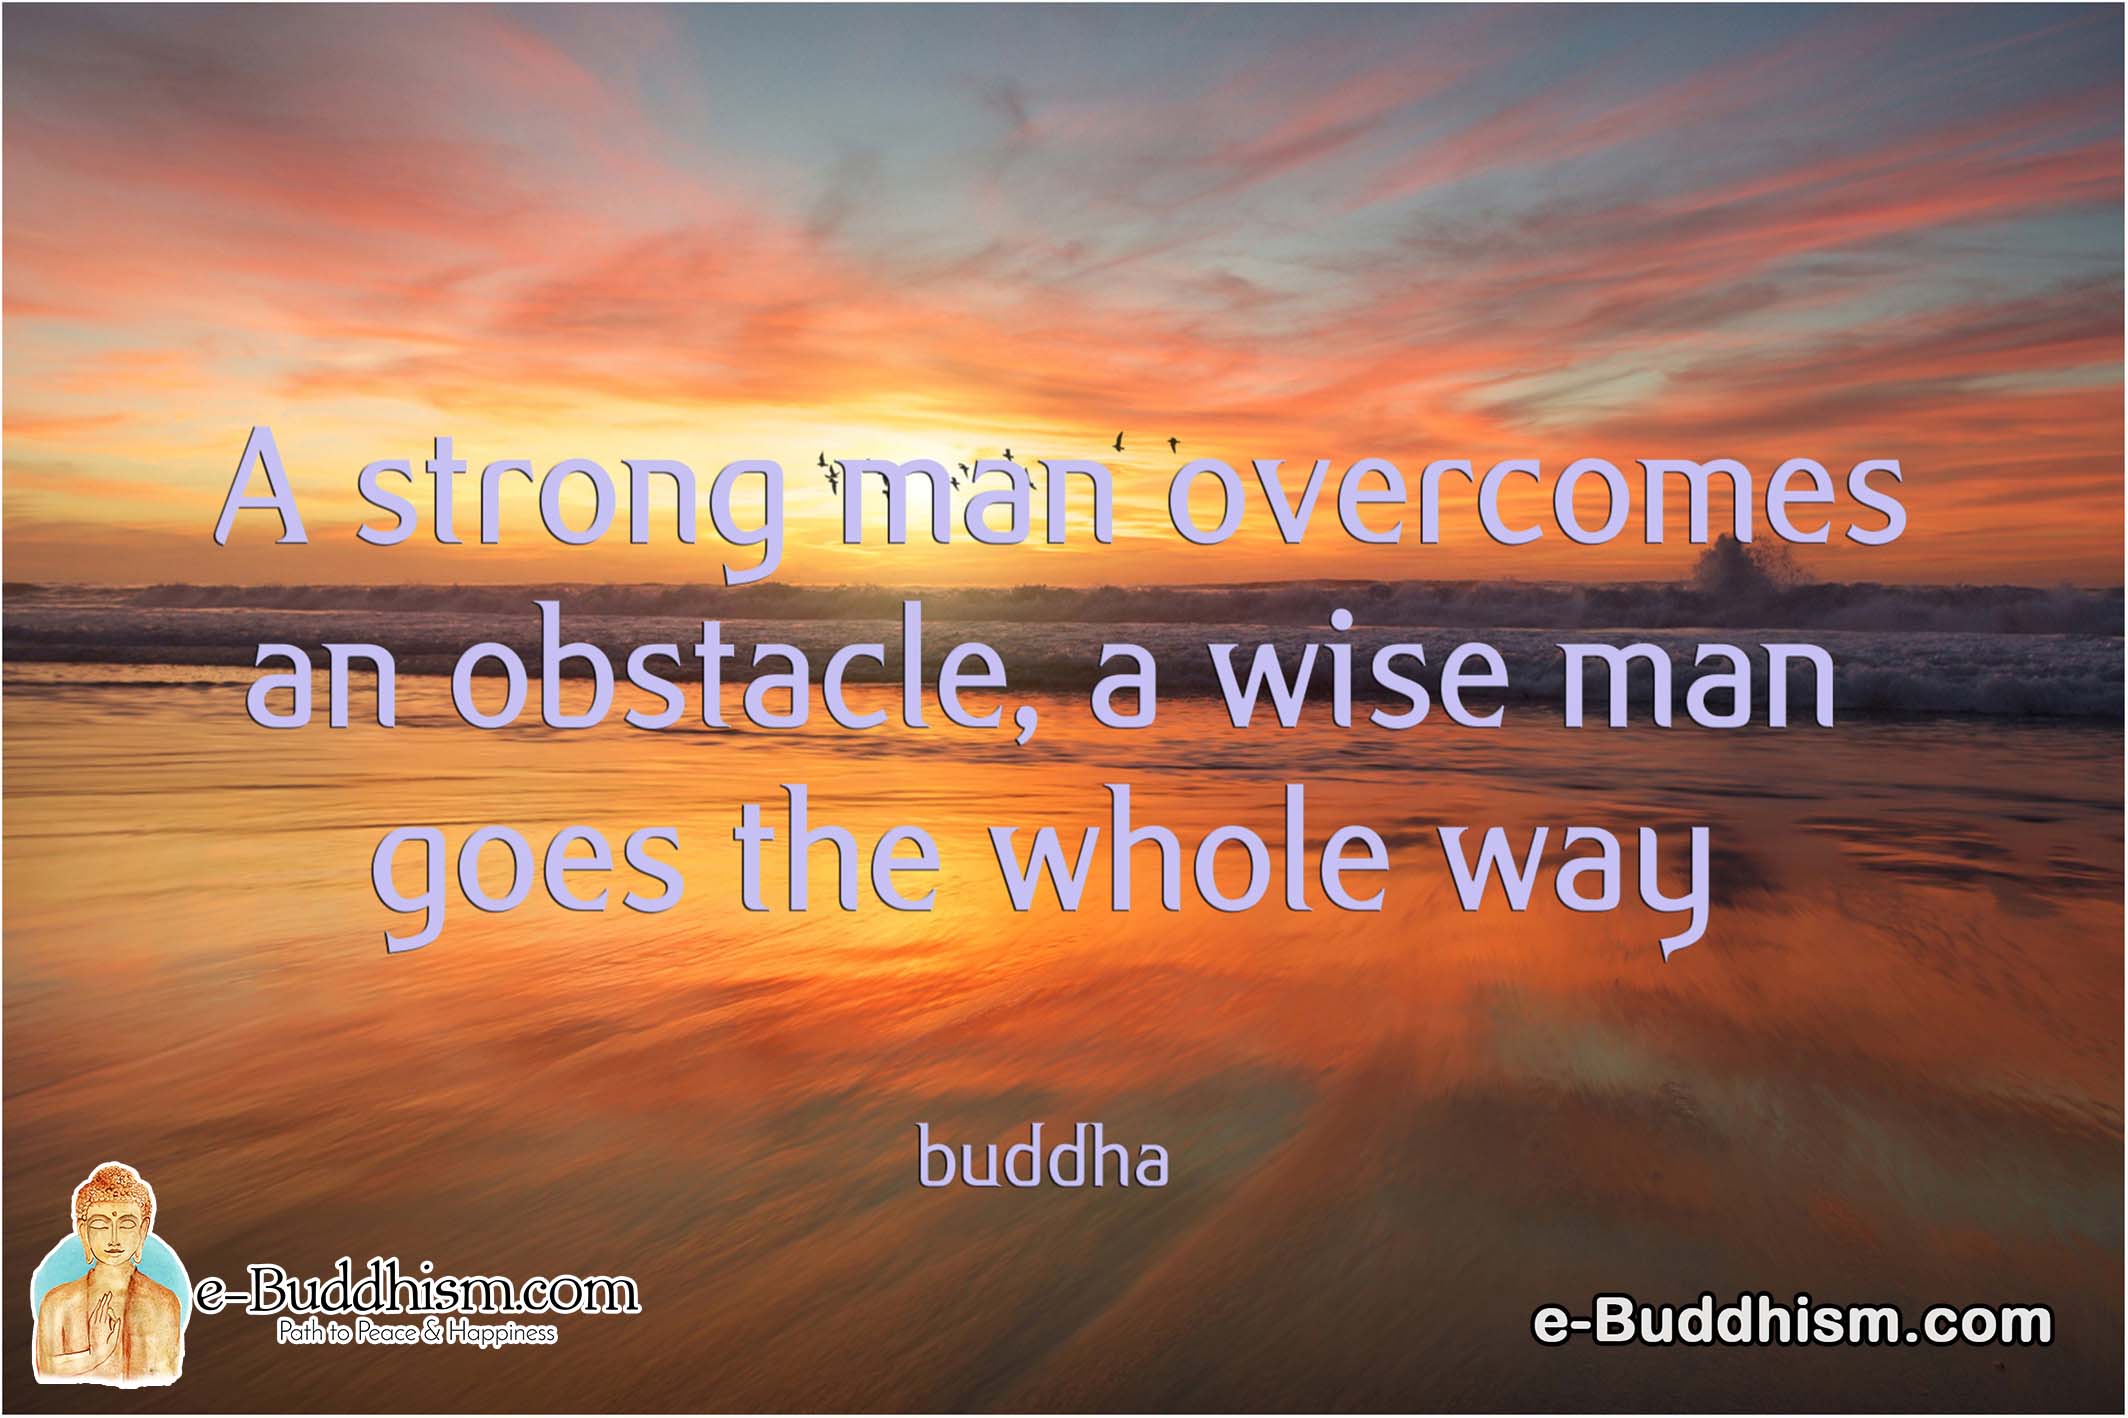 A strong man overcomes an obstacle, a wise man goes the whole way. -Buddha